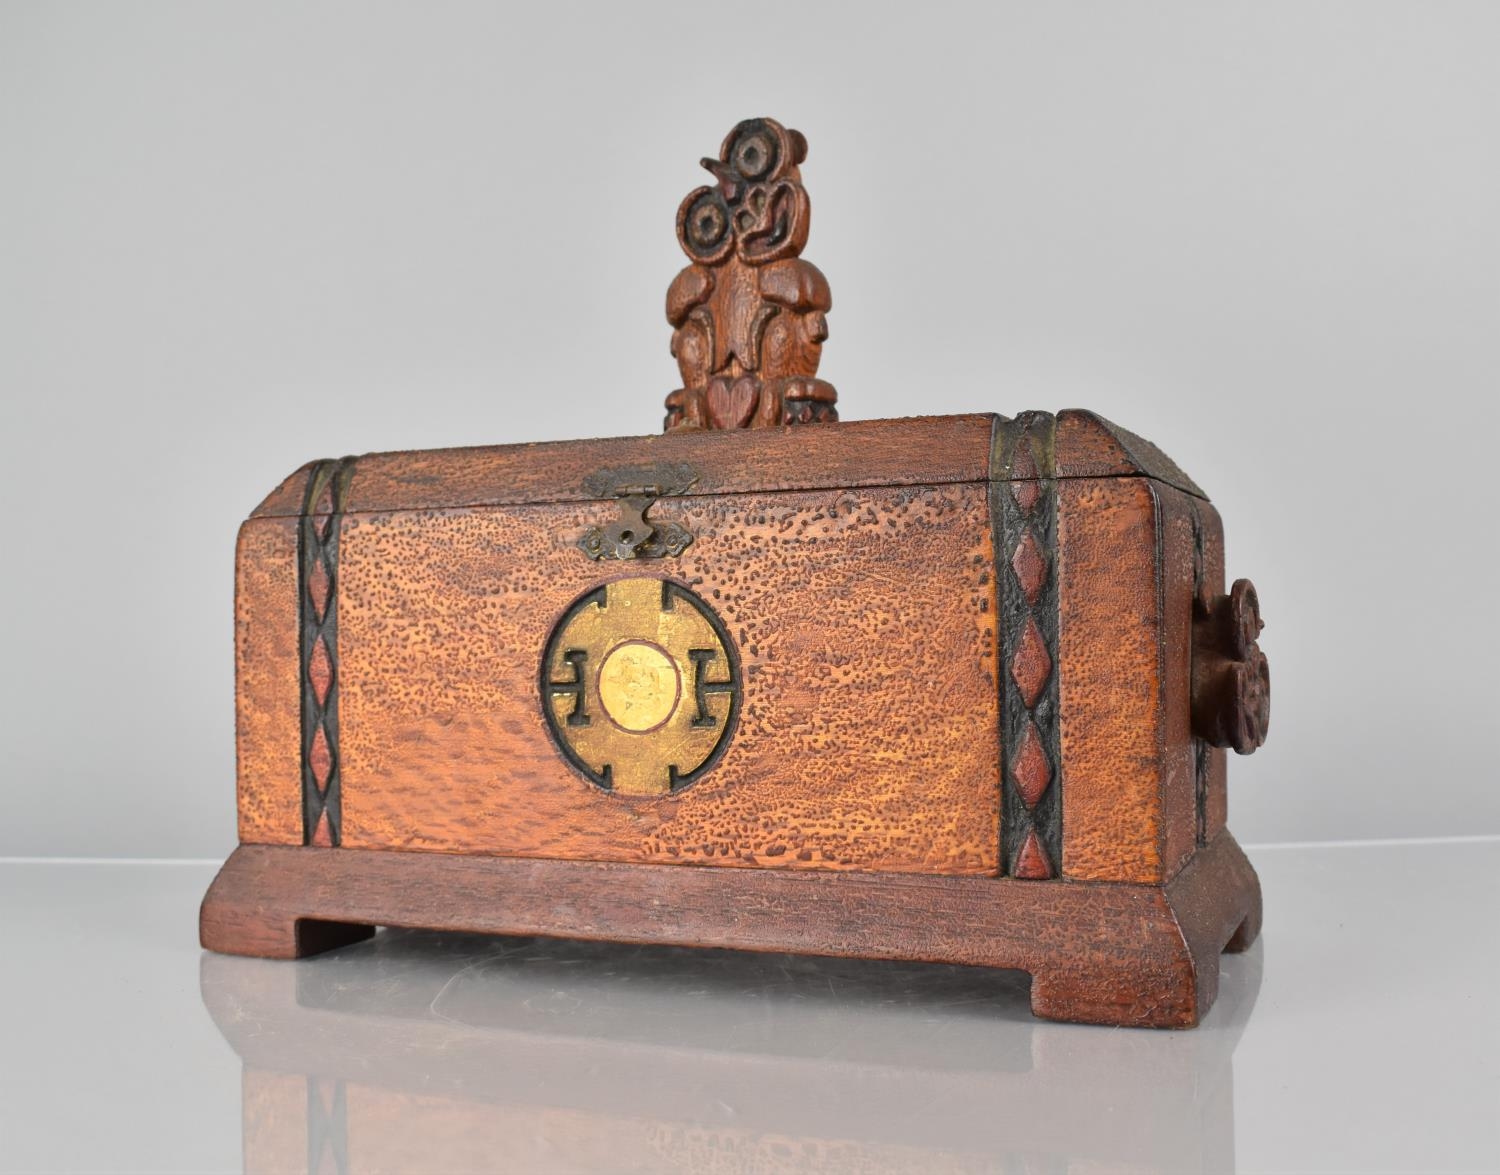 An Early 20th Century New Zealand Maori Carved Wooden Box, Top Decorated with a Carved Hei-Tiki - Image 4 of 6